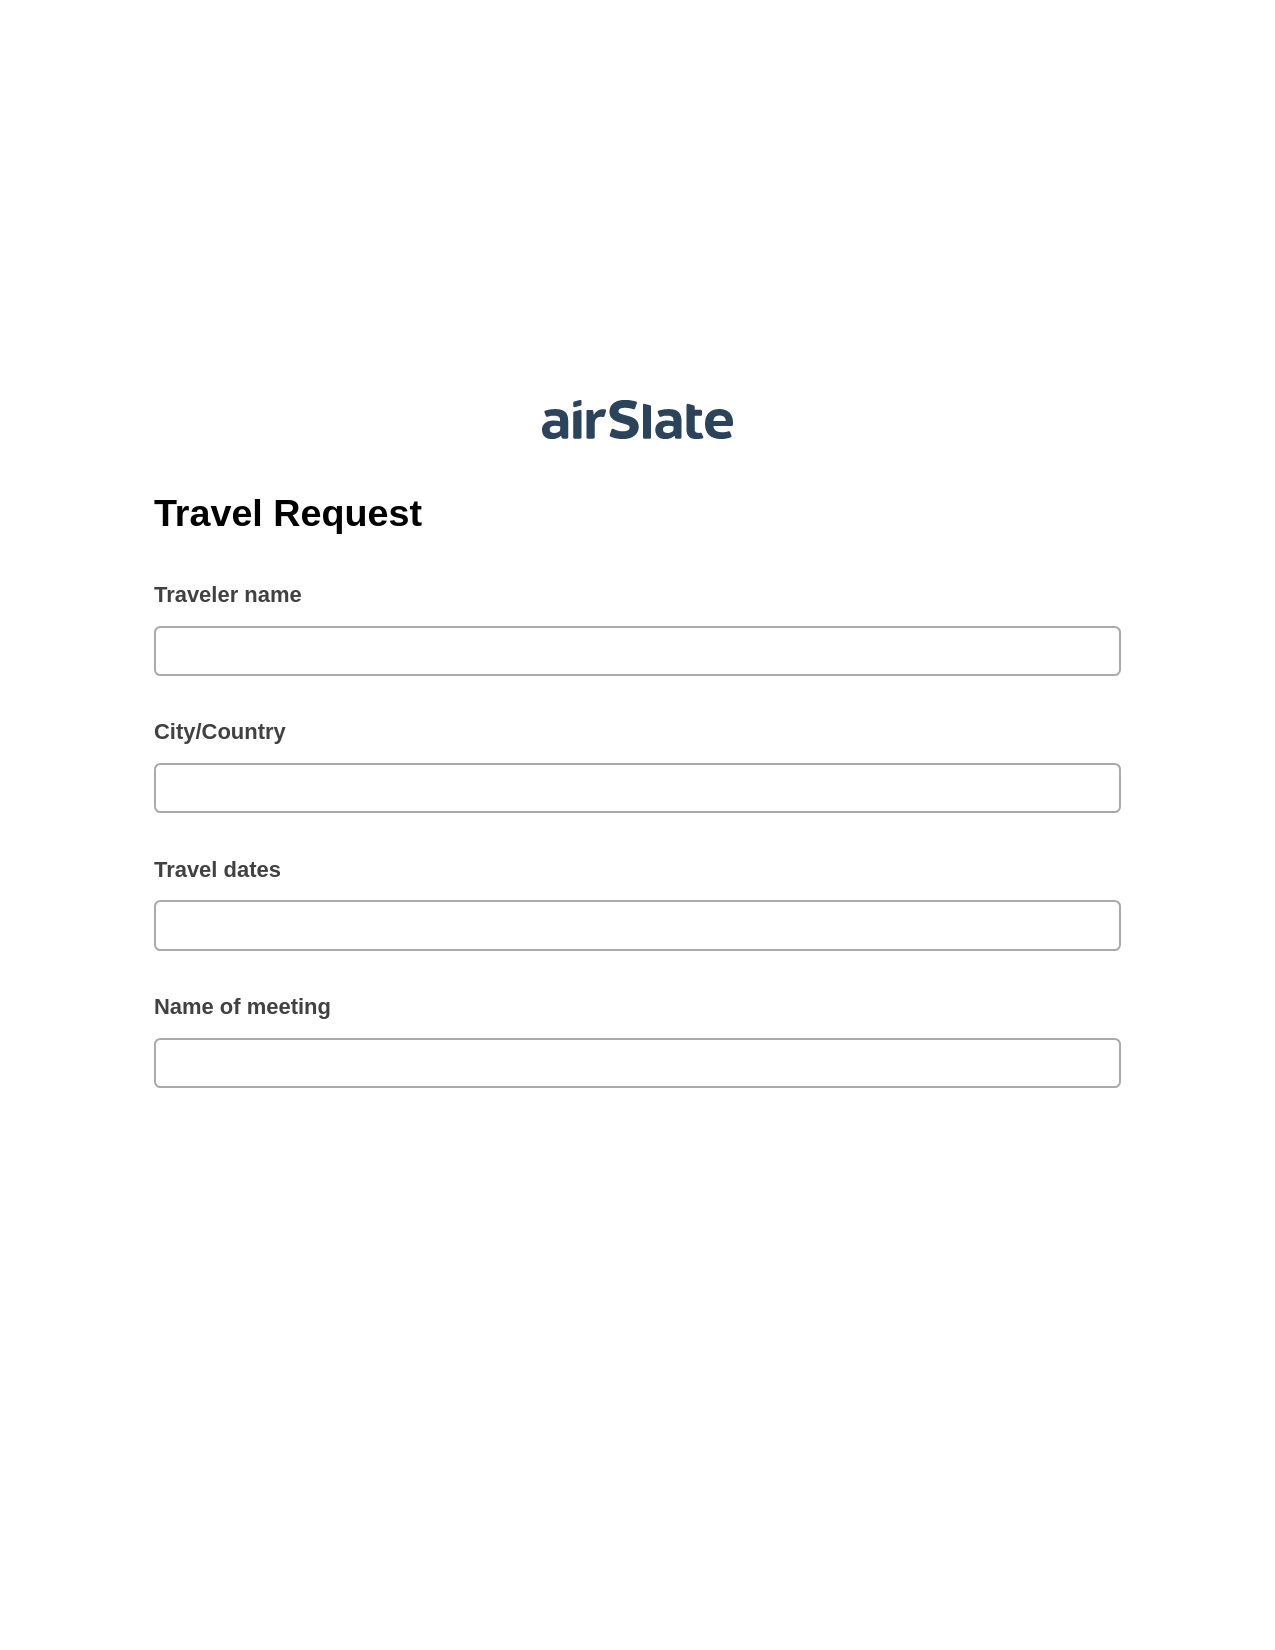 Travel Request Pre-fill Slate from MS Dynamics 365 Records Bot, Send a Slate with Roles Bot, Email Notification Postfinish Bot